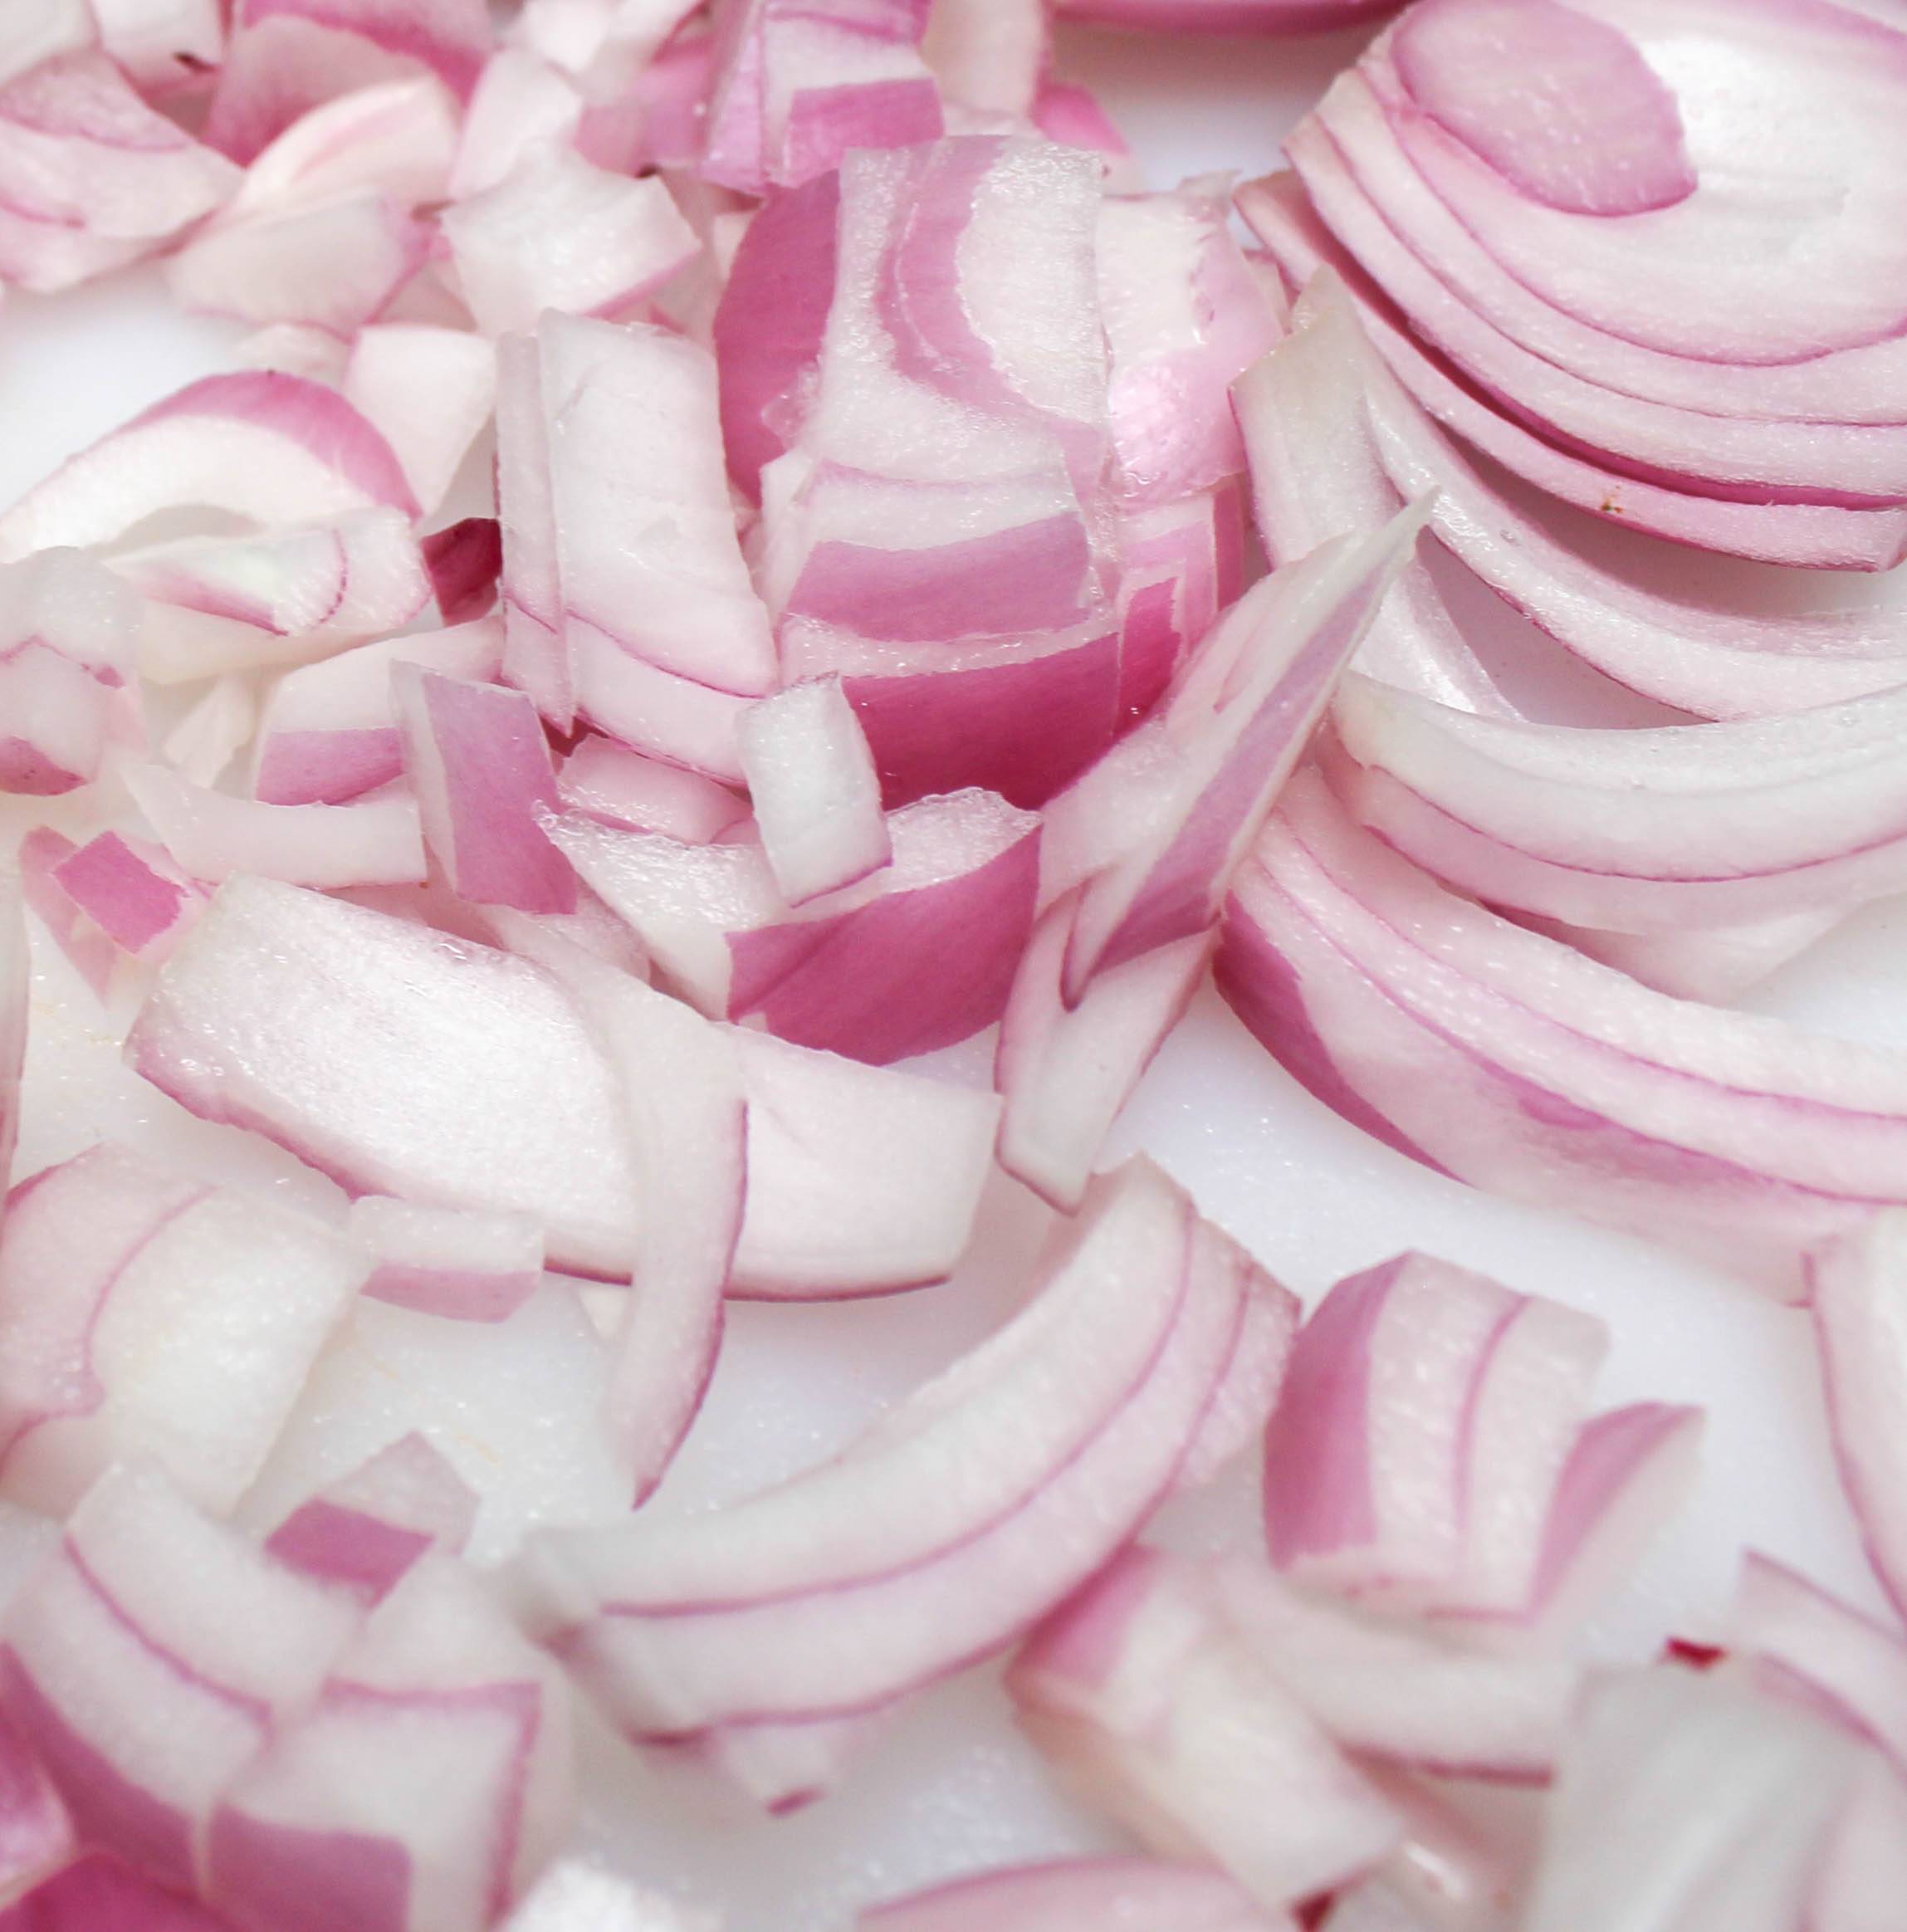 chopped red onion for winning chili recipe for chili cookoff